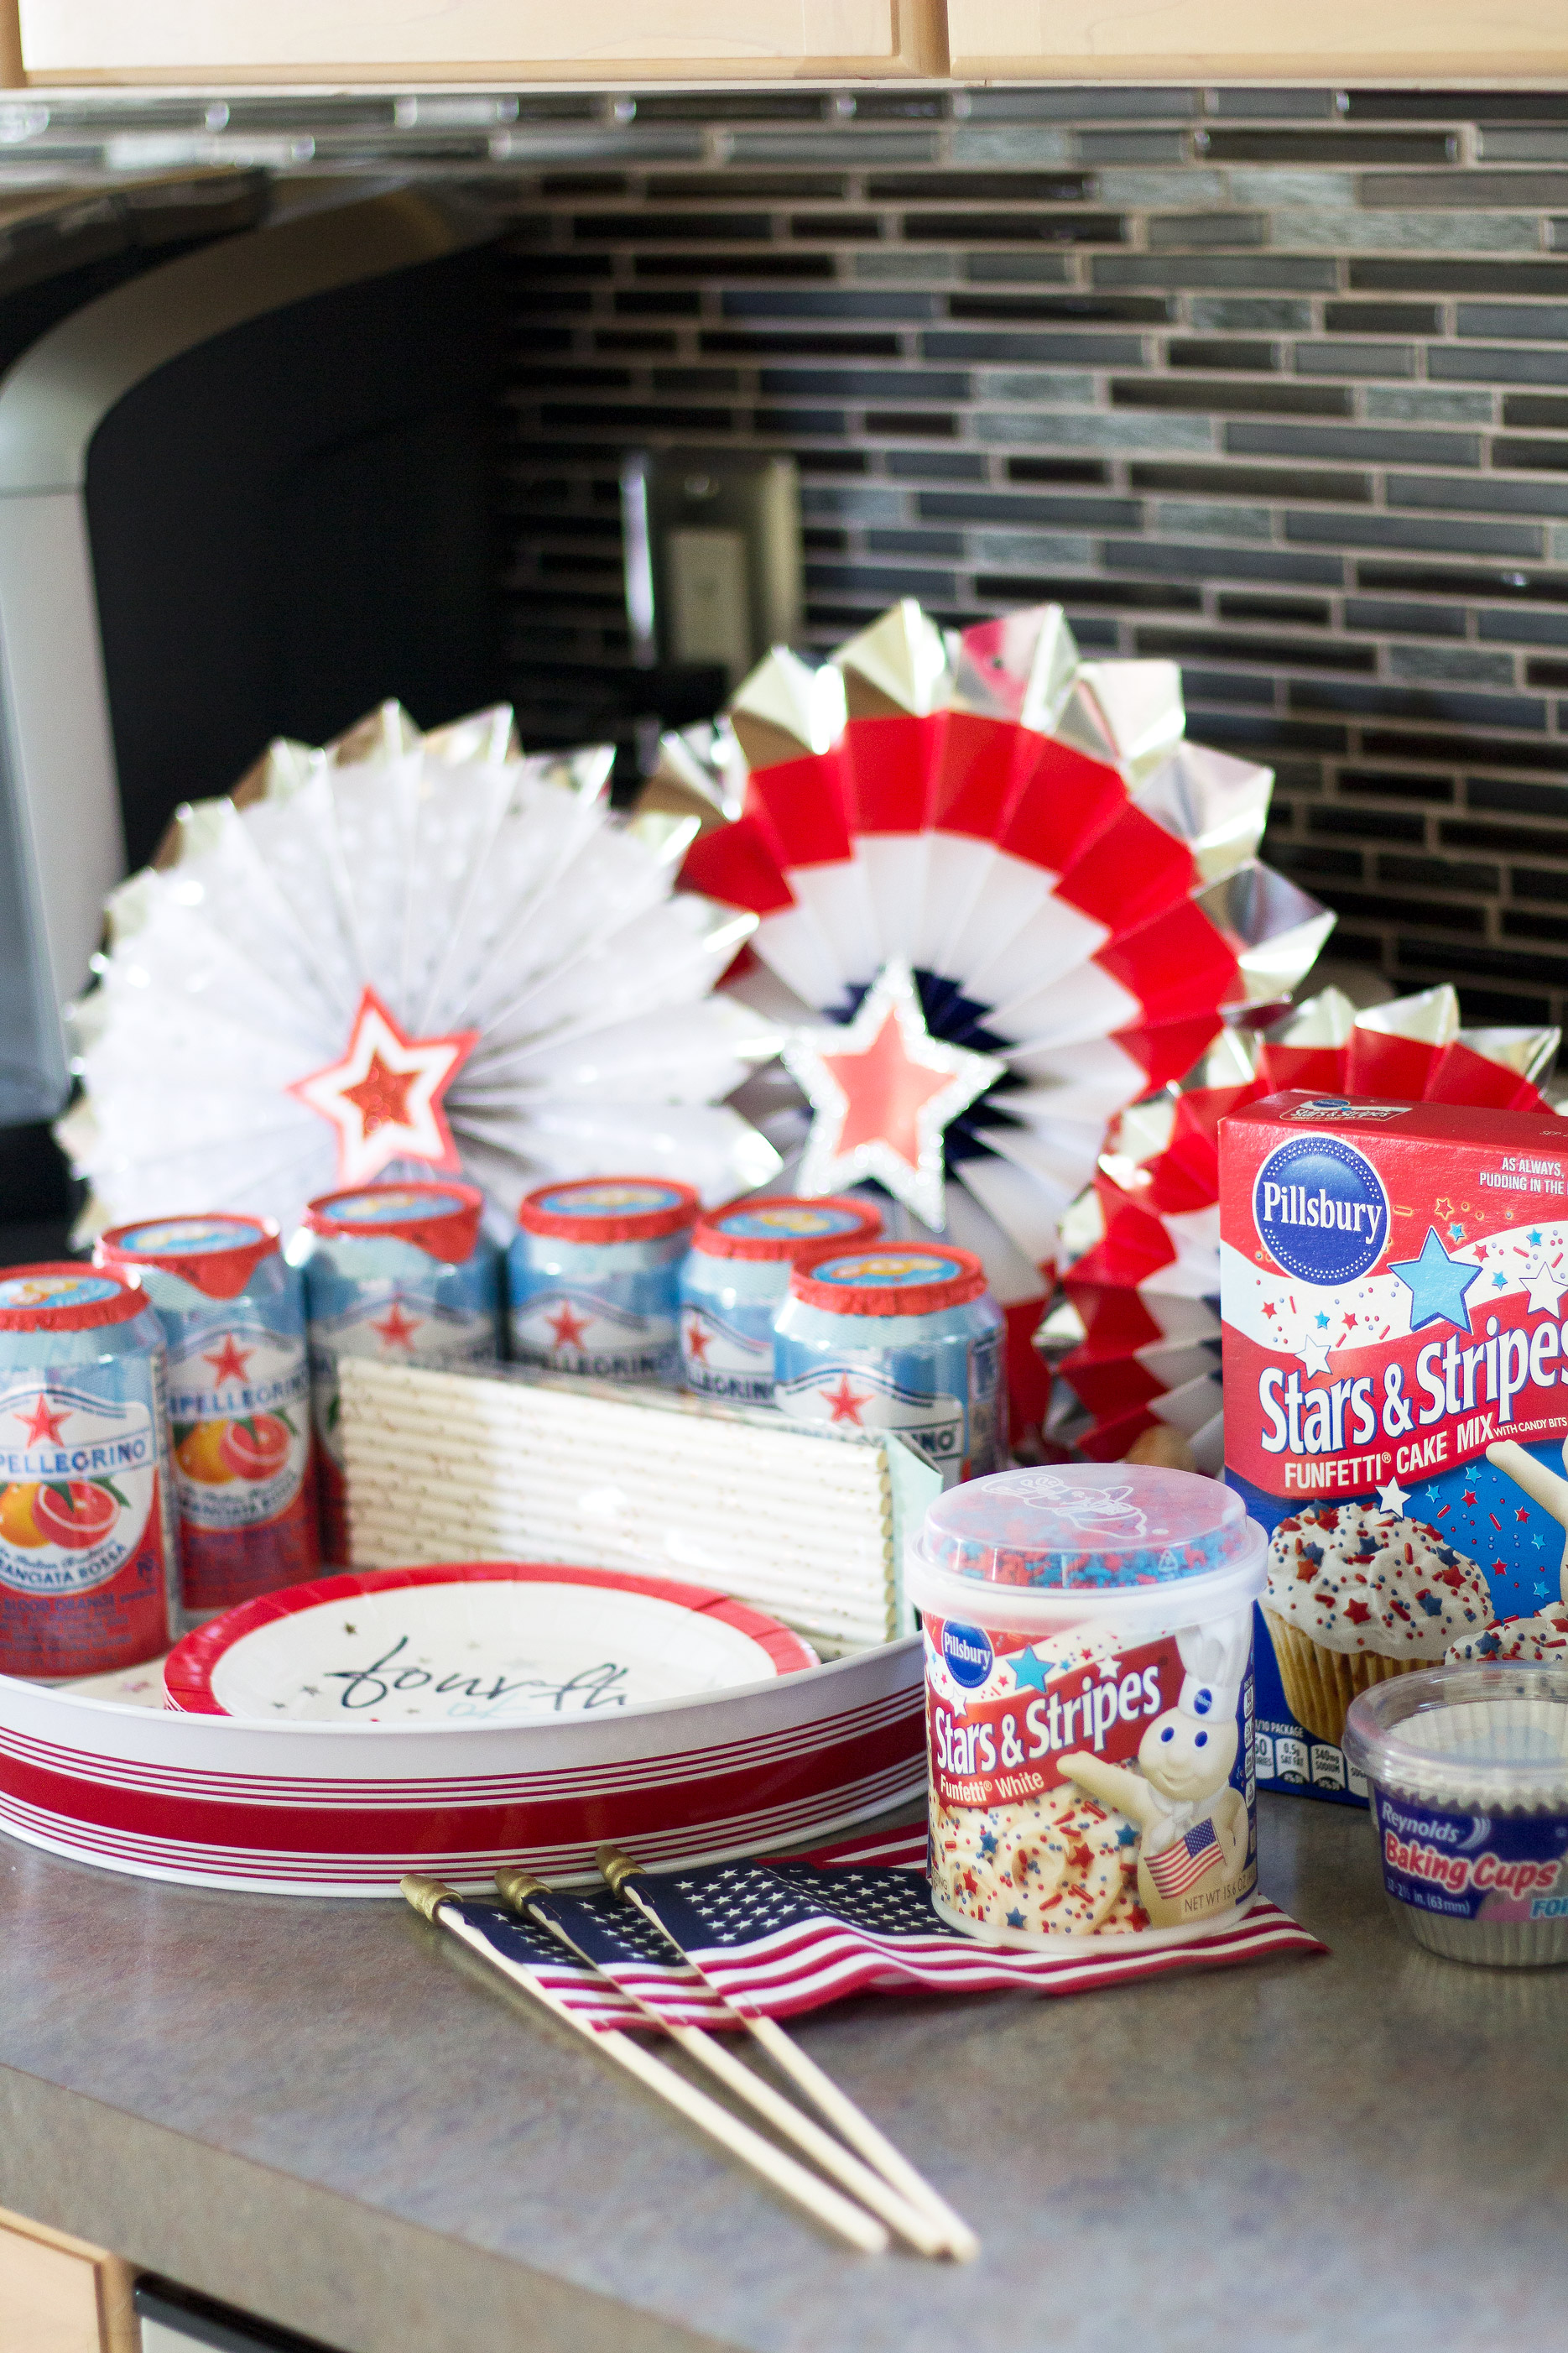 The Best of July 4th Sales and Goodies